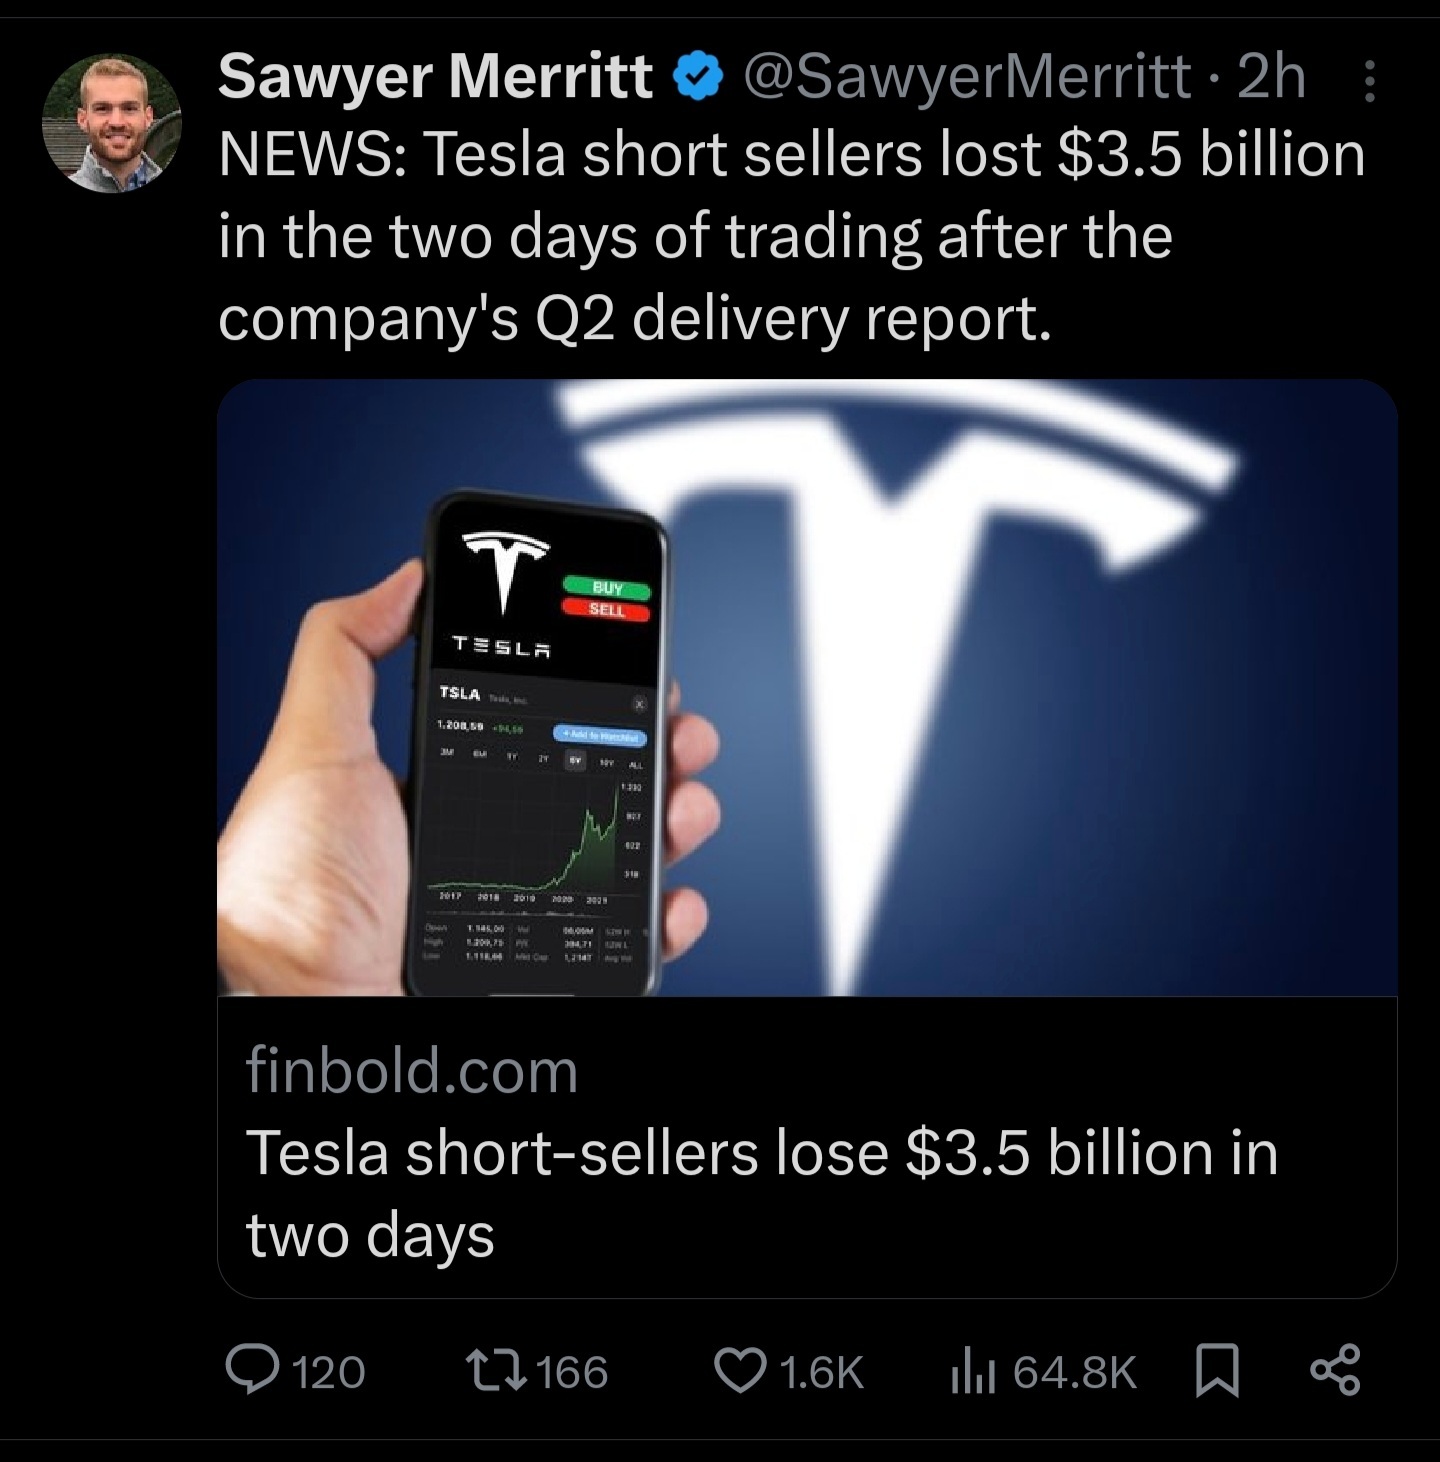 $Tesla (TSLA.US)$ It only took 2 days for the bears to lose 3.5 billion. That's too little; at least they lost 35 billion dollars. personal feeling